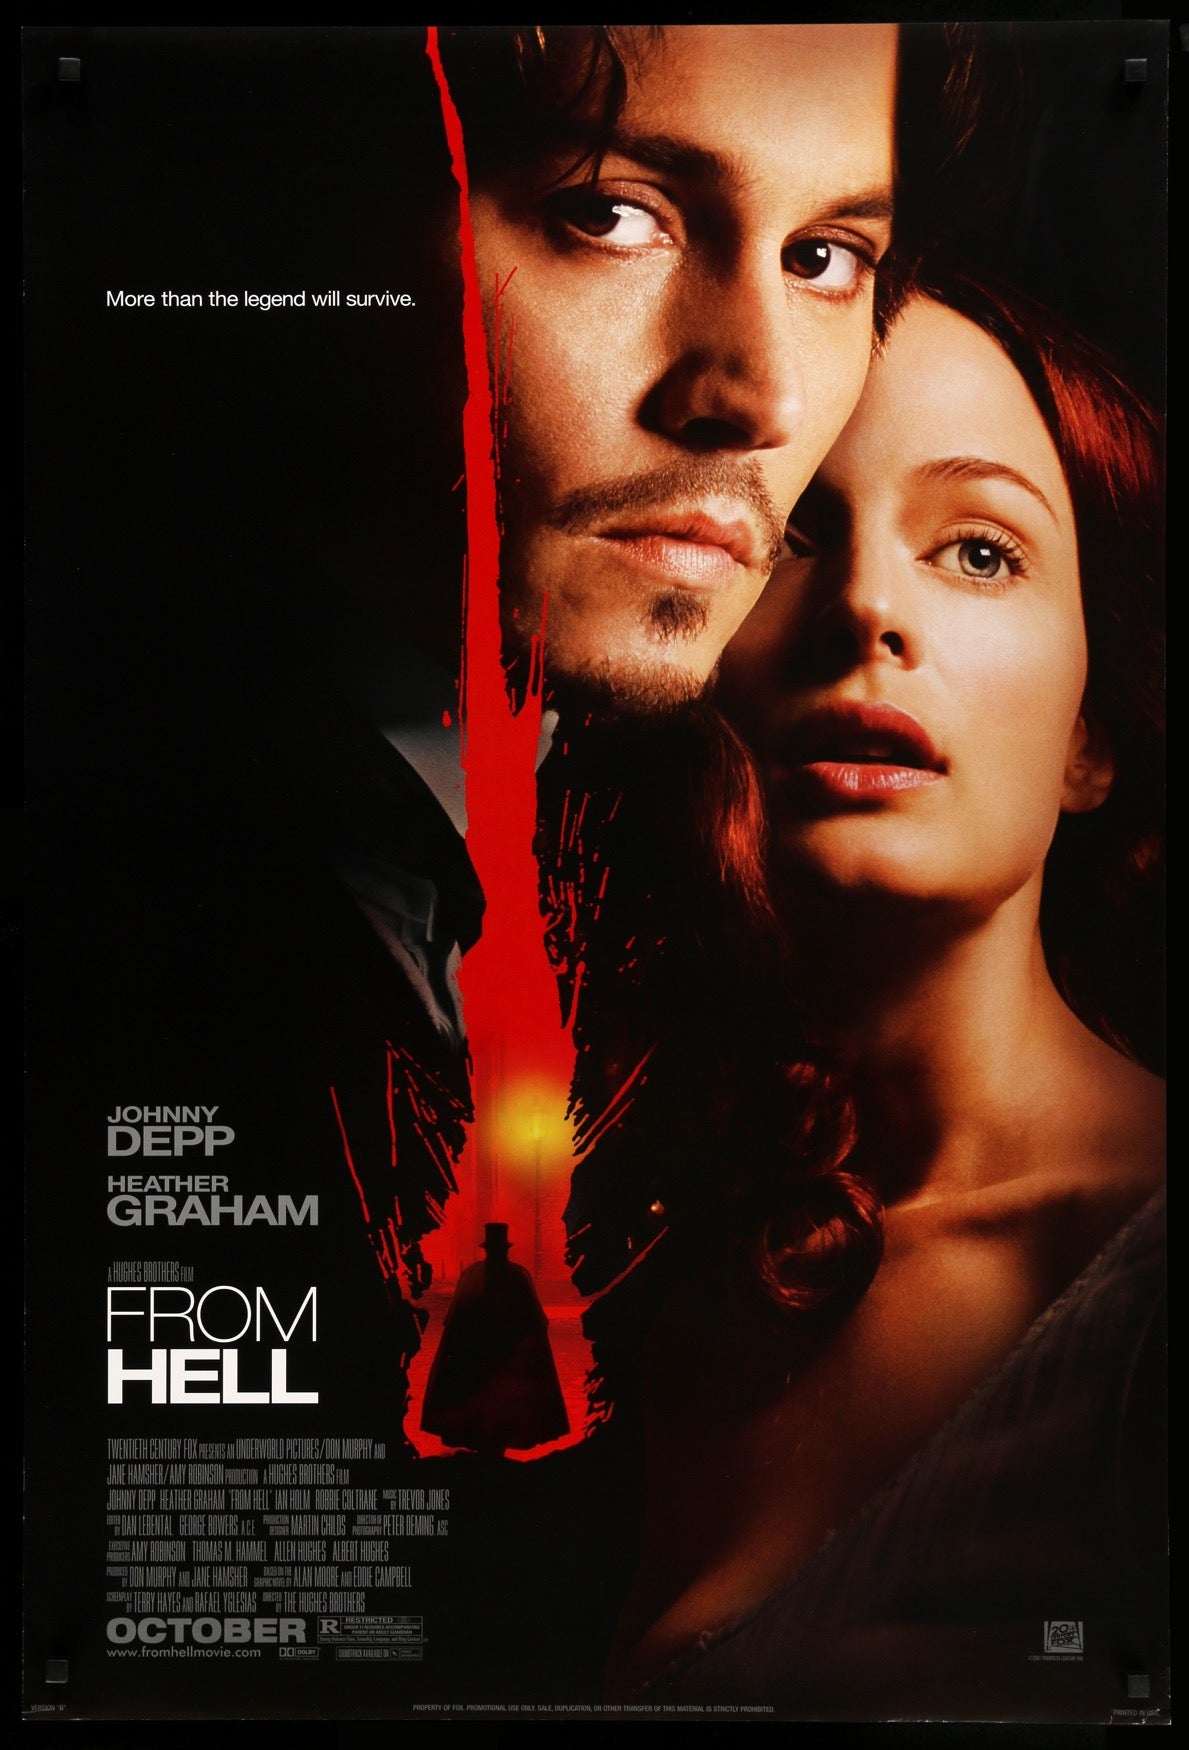 From Hell (2001) original movie poster for sale at Original Film Art